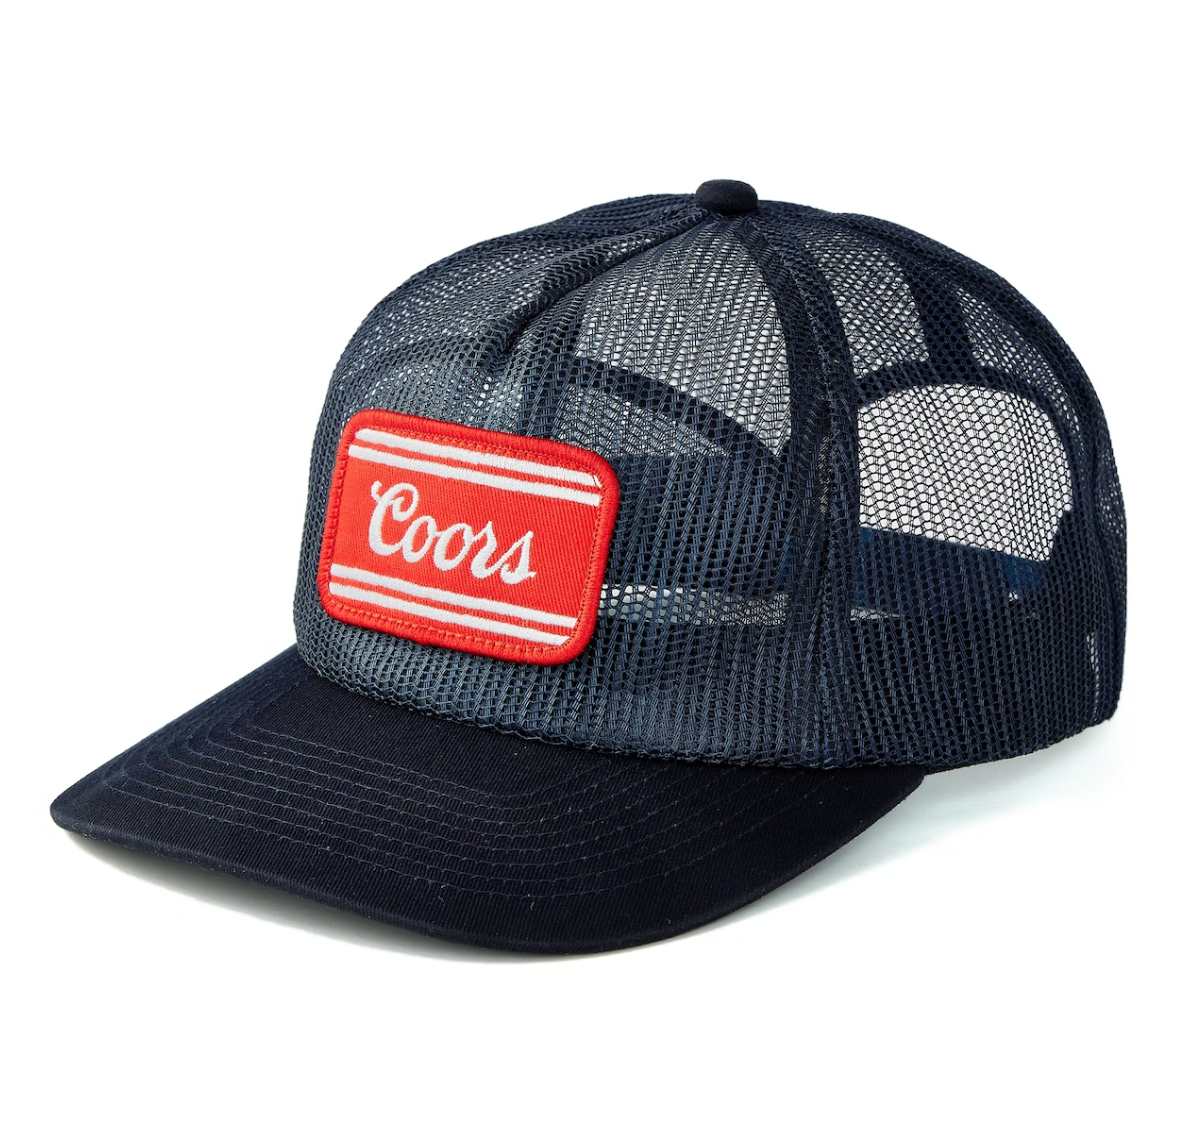 navy mesh trucker hat with a Coors patch